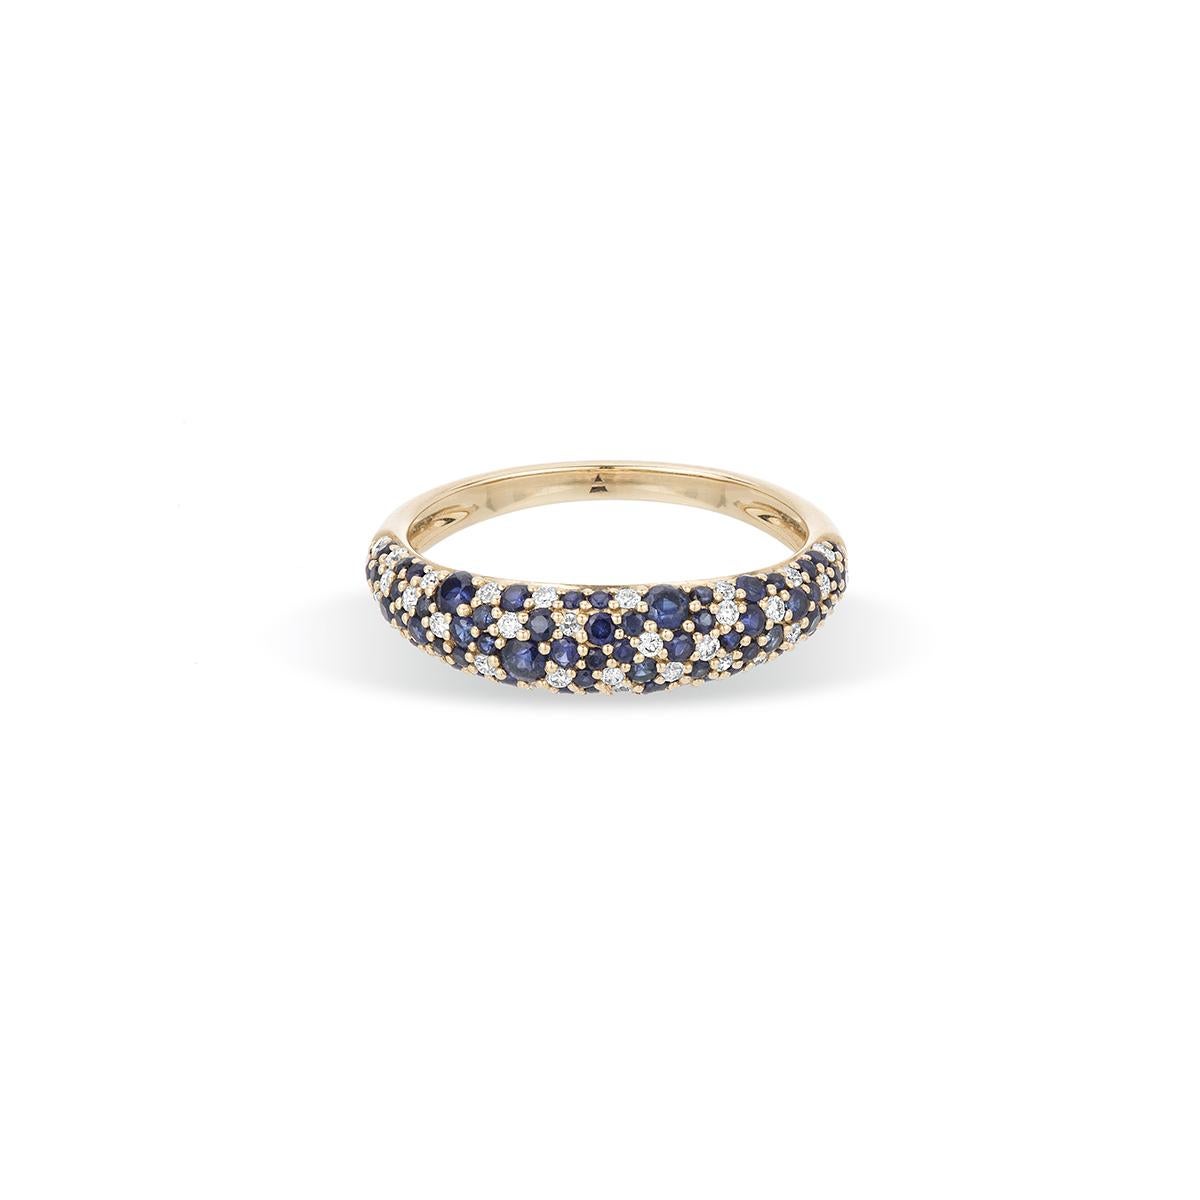 Adina Reyter Night Sky Pave Sapphire + Diamond Dome Ring Size 5 - Y14

14k yellow gold dome band ring with hand-set pavé diamonds and sapphires. Ring measures approximately 4.5mm at the widest point. 

Total Diamond Carat Weight: 0.16 Ct. / Total